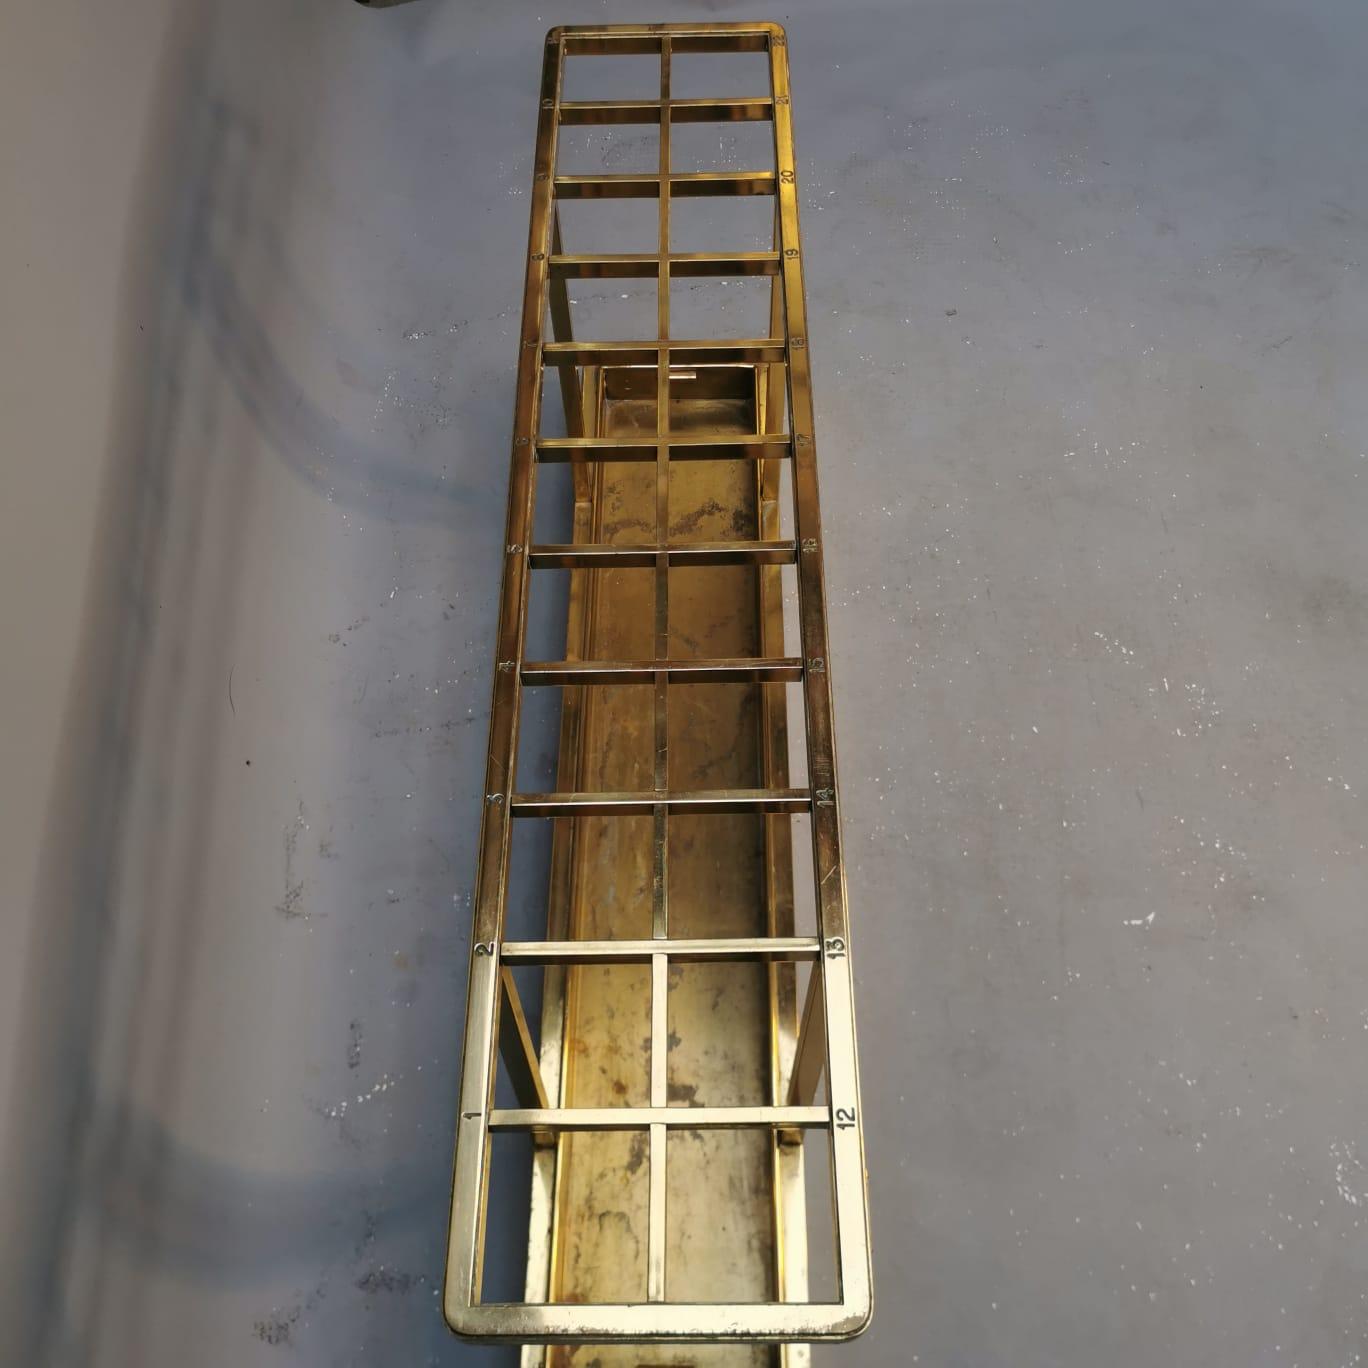 A singular and precious object, made of brass and numbering individual spaces for umbrellas. An object that will make any entryway majestic, functional and extremely elegant. It is in good overall condition, however may show some general signs of